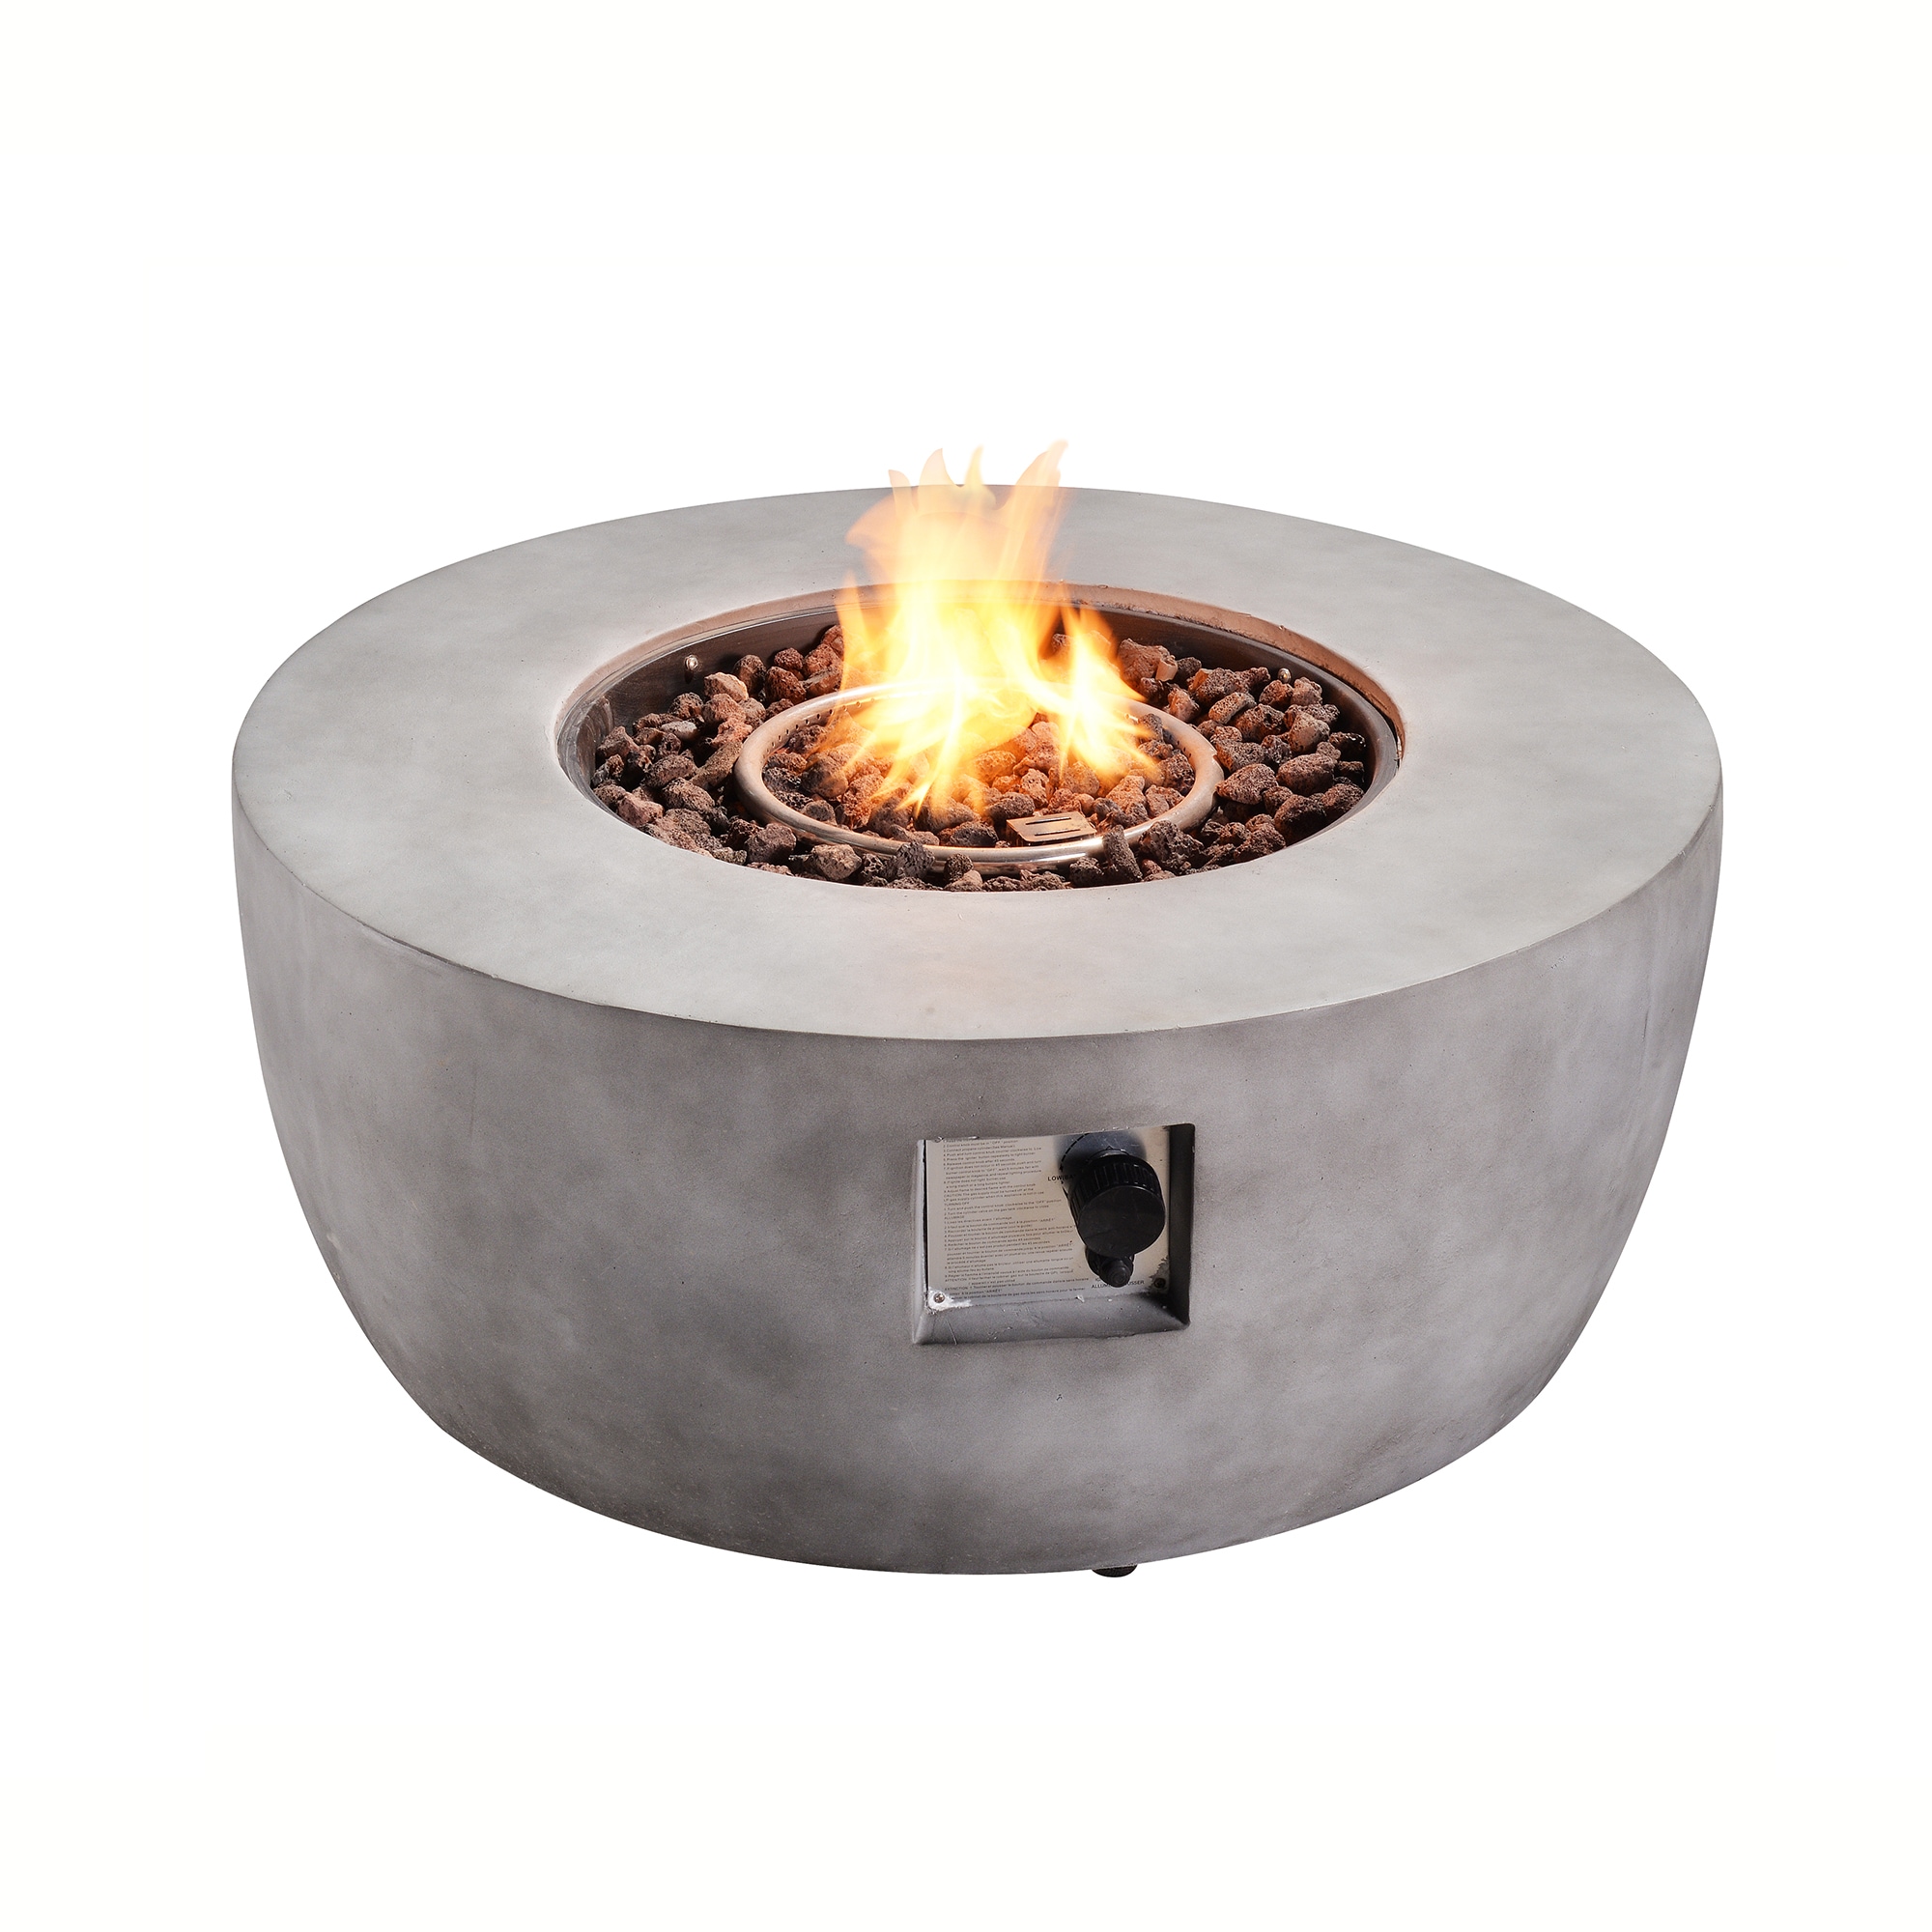 Concrete Propane Gas Fire Pit, How To Build A Propane Gas Fire Pit